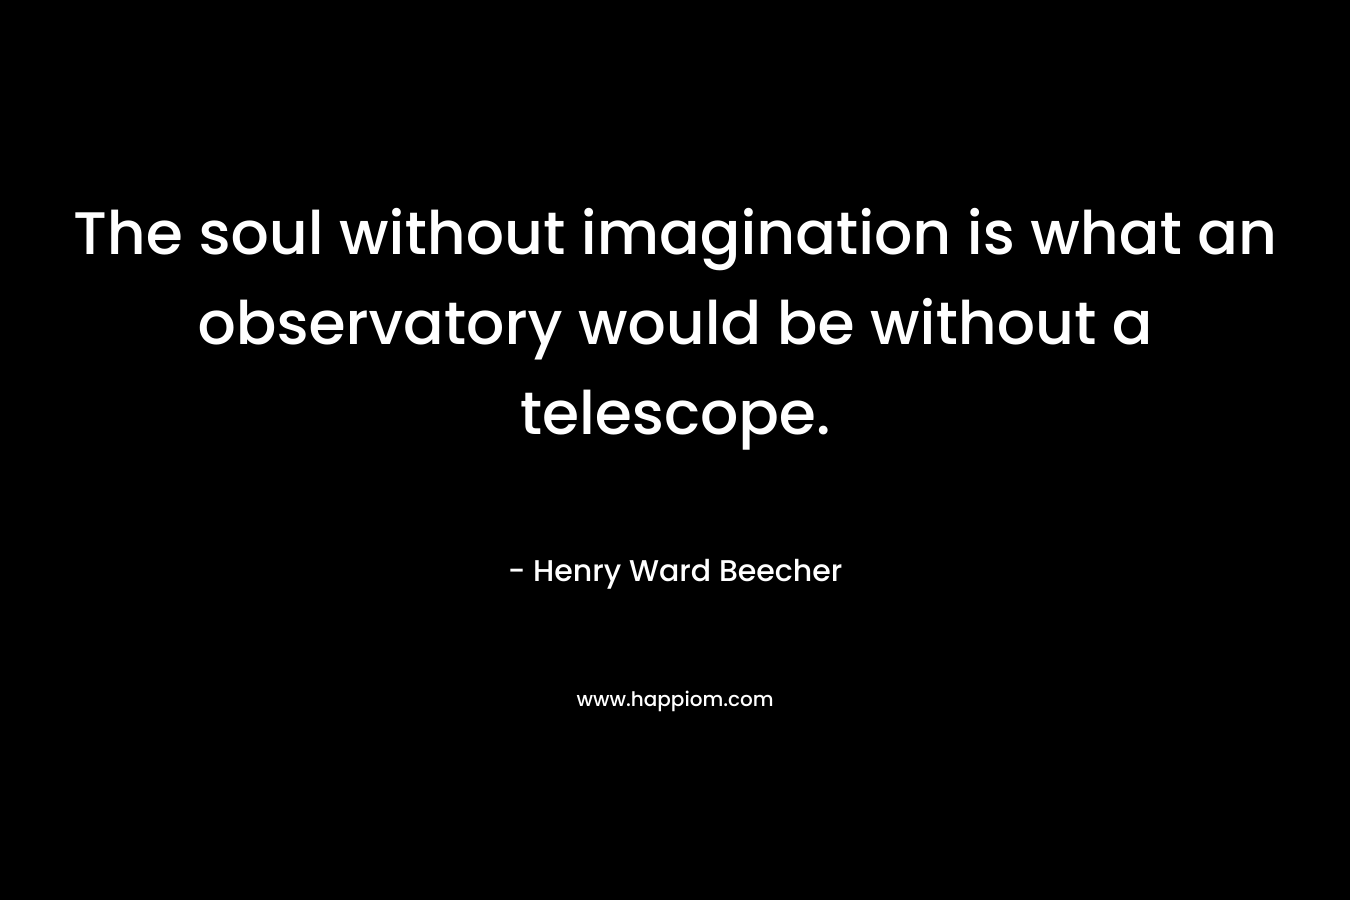 The soul without imagination is what an observatory would be without a telescope.